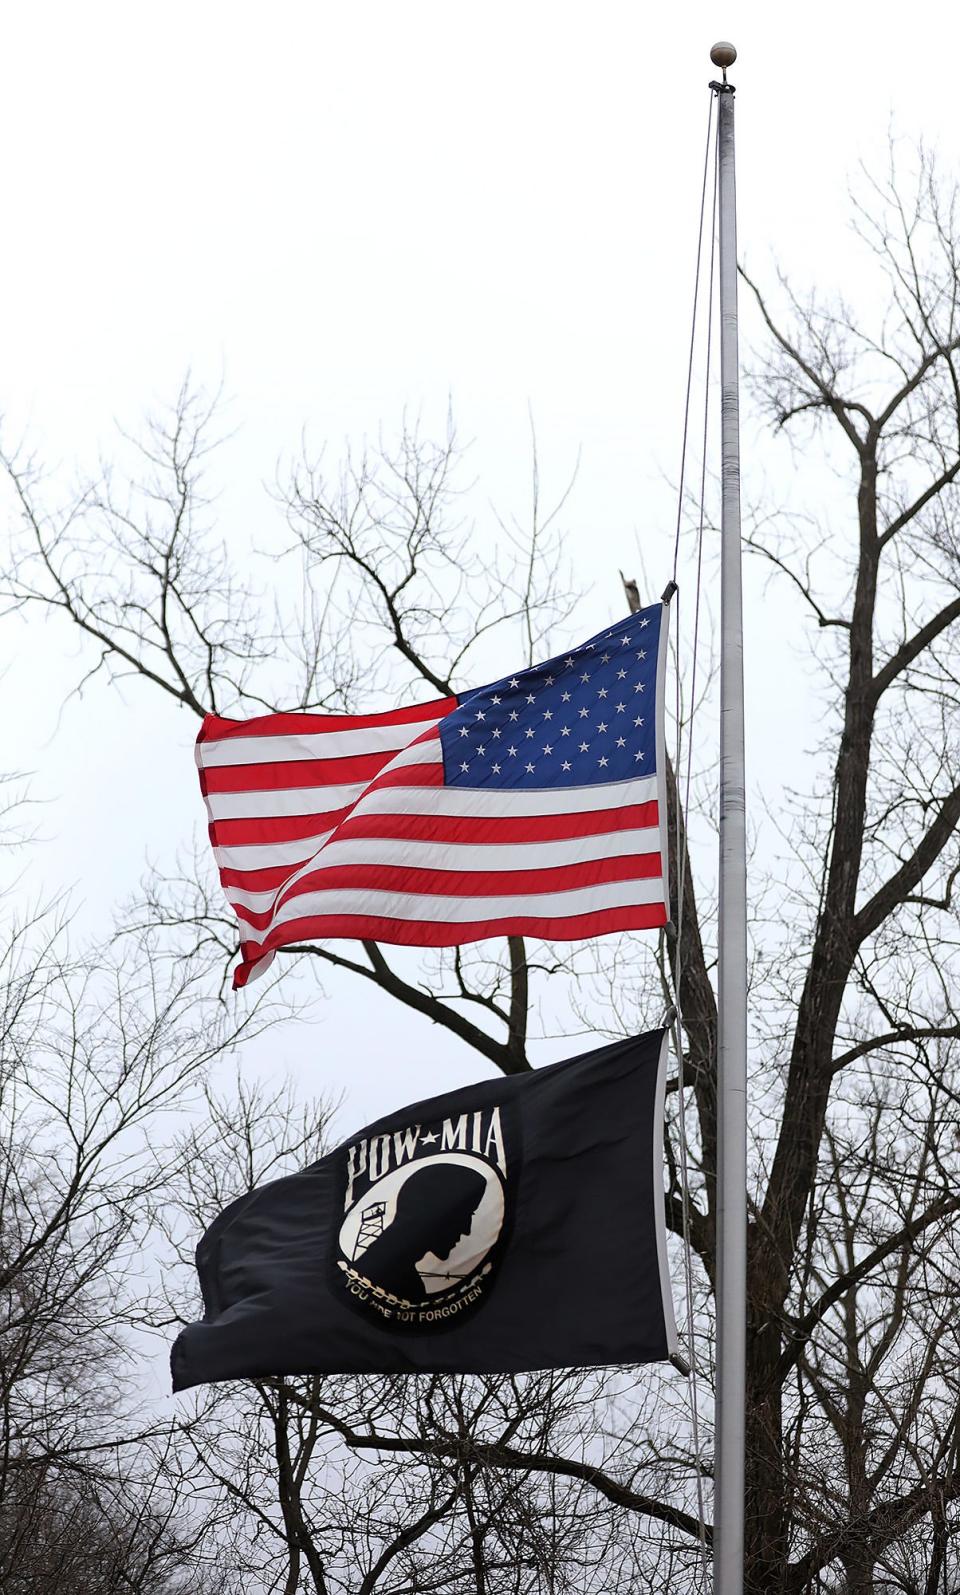 The United States flag flies at half-staff at Gahanna Veterans Memorial in Gahanna on Tuesday, January 12, 2021.